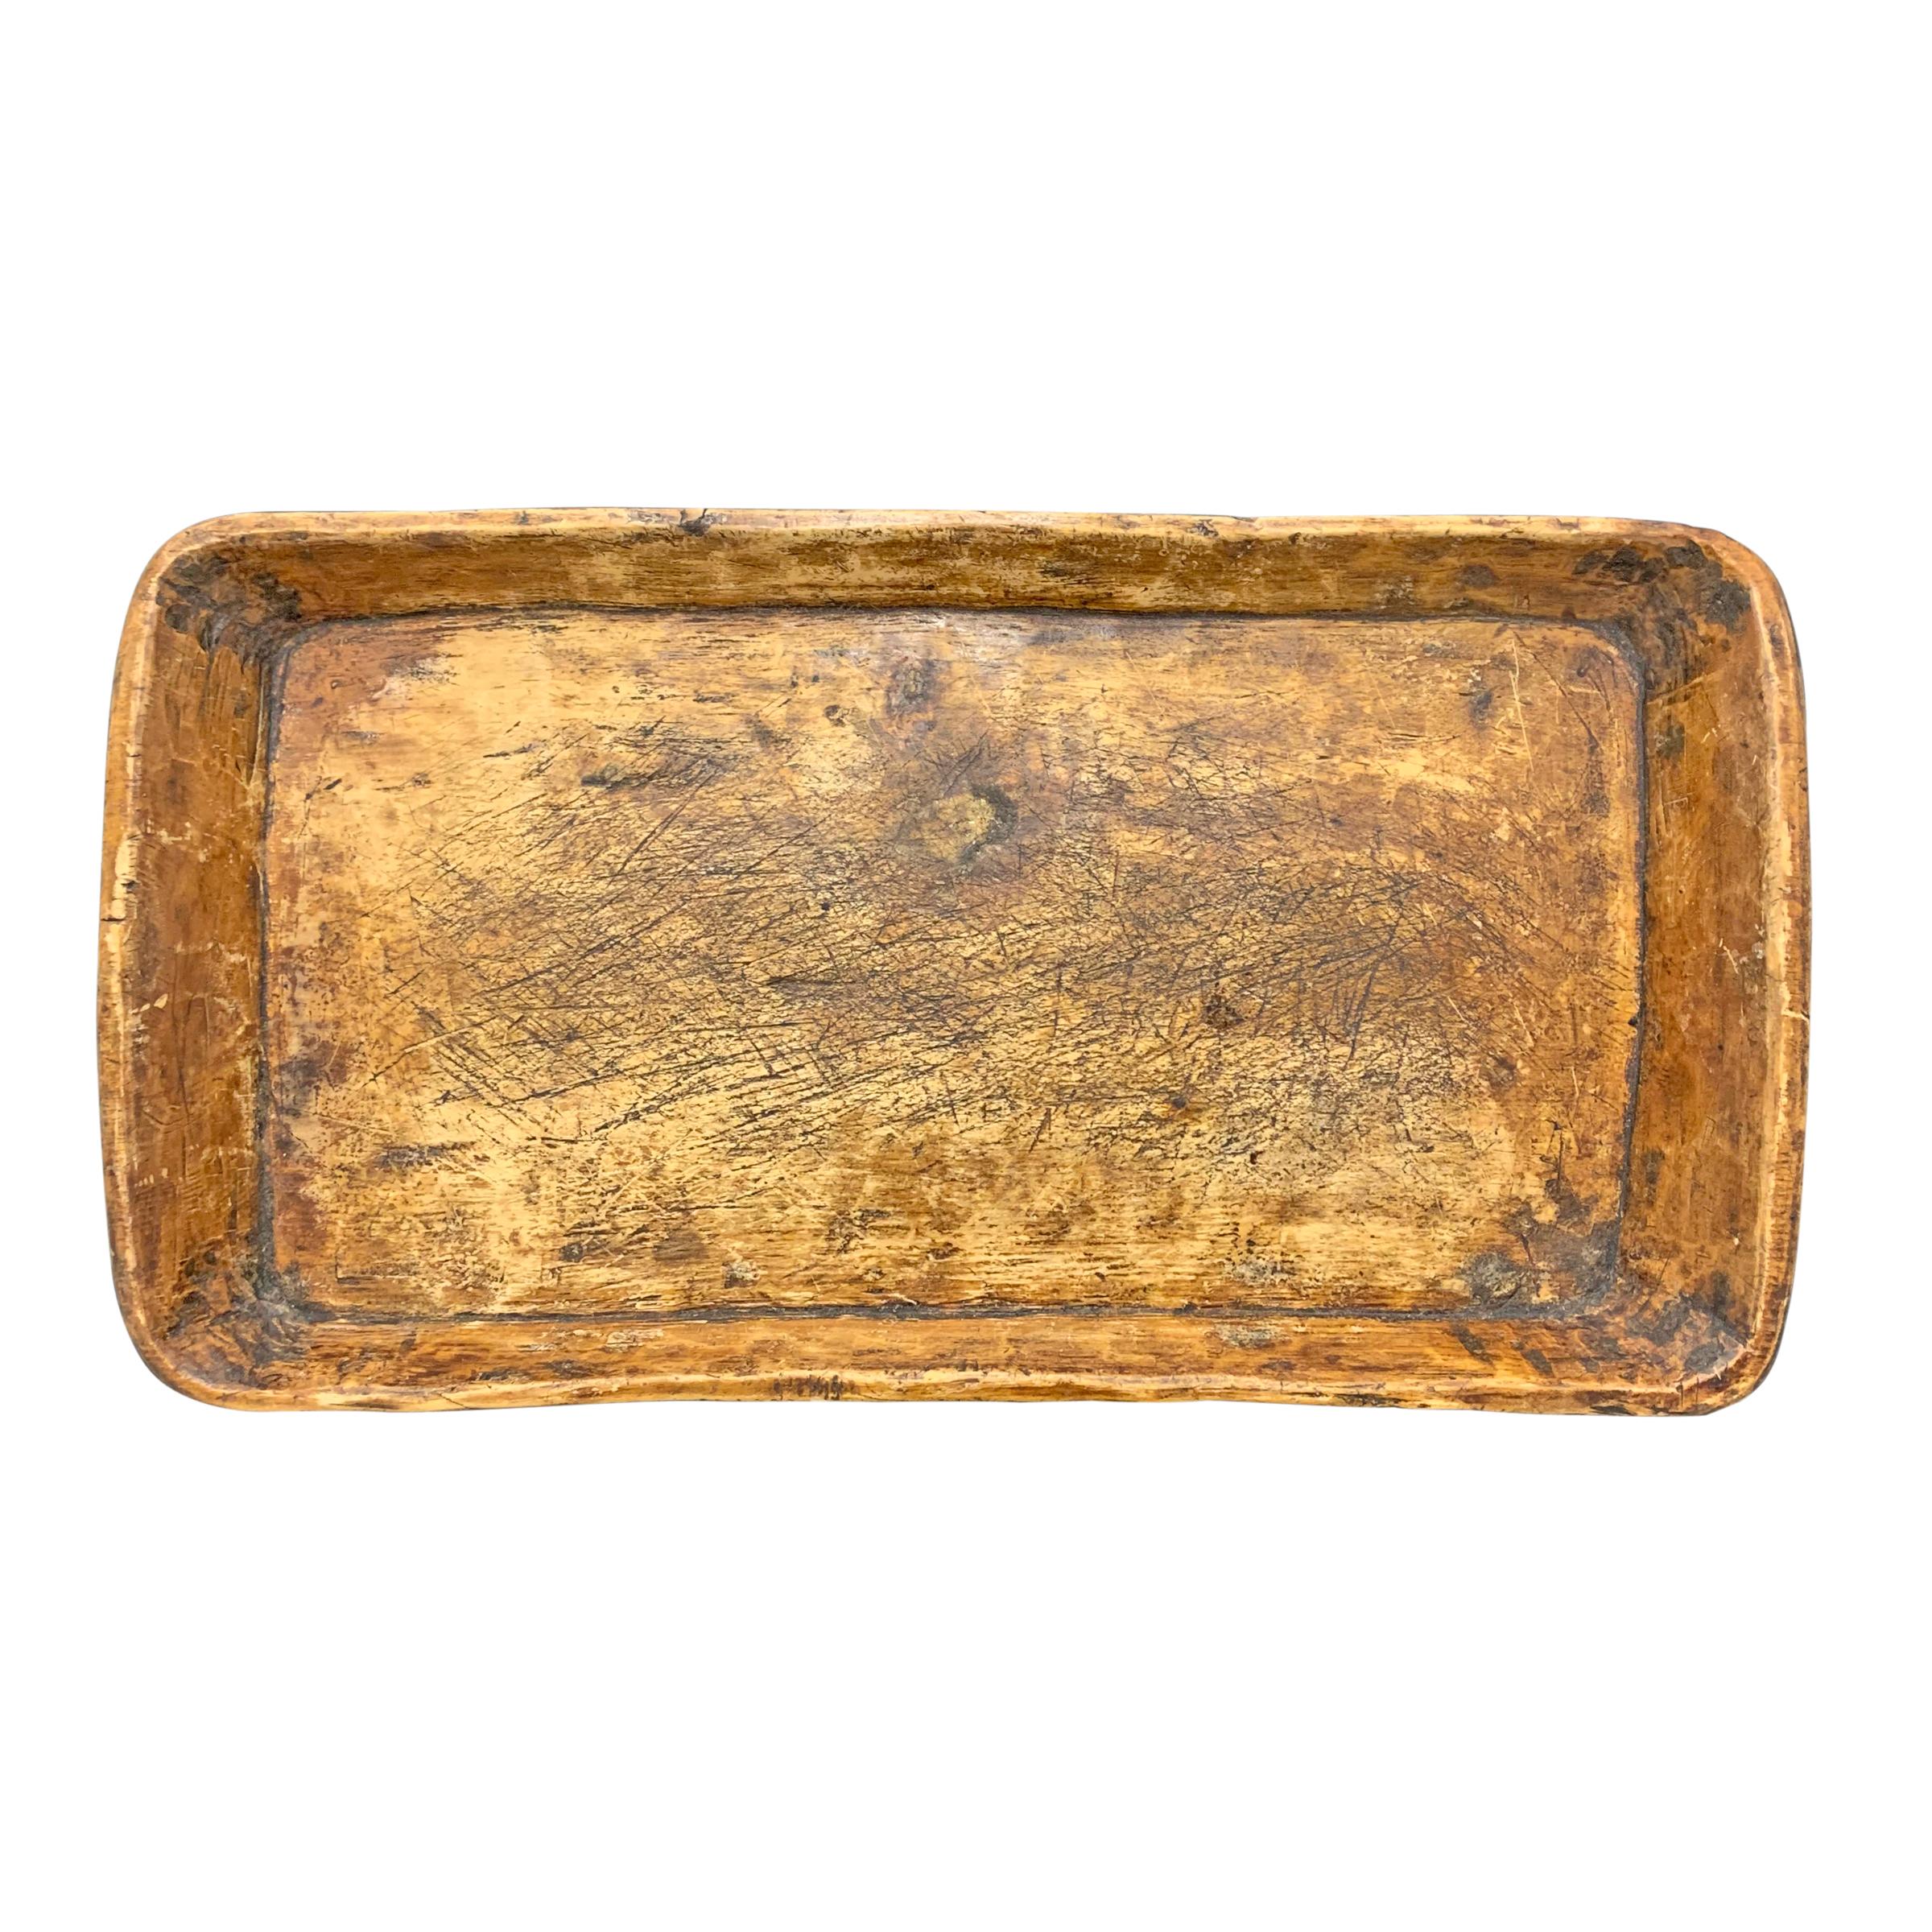 Hand-Carved 19th Century Carved Wood Tray